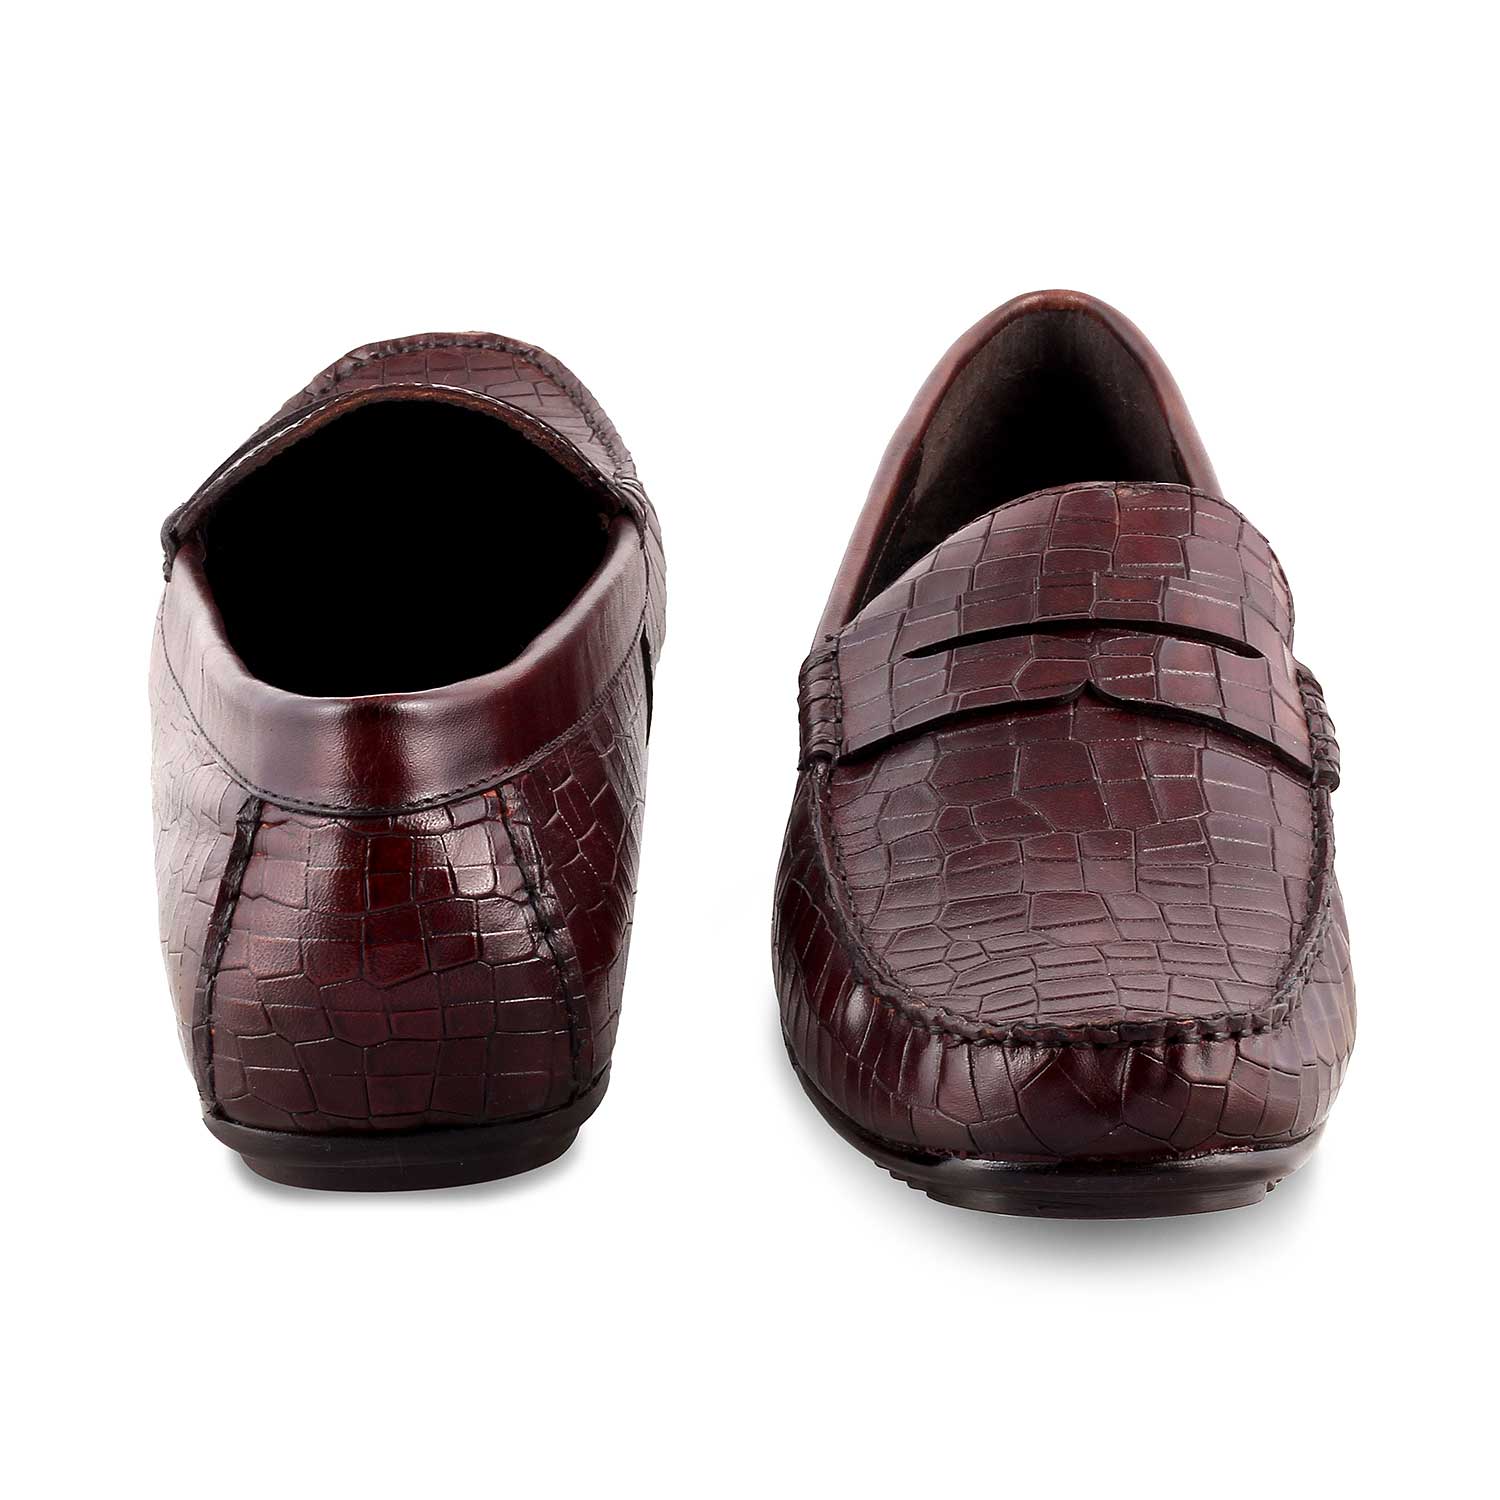 The Avyo Brown Men's Leather Loafers Tresmode - Tresmode